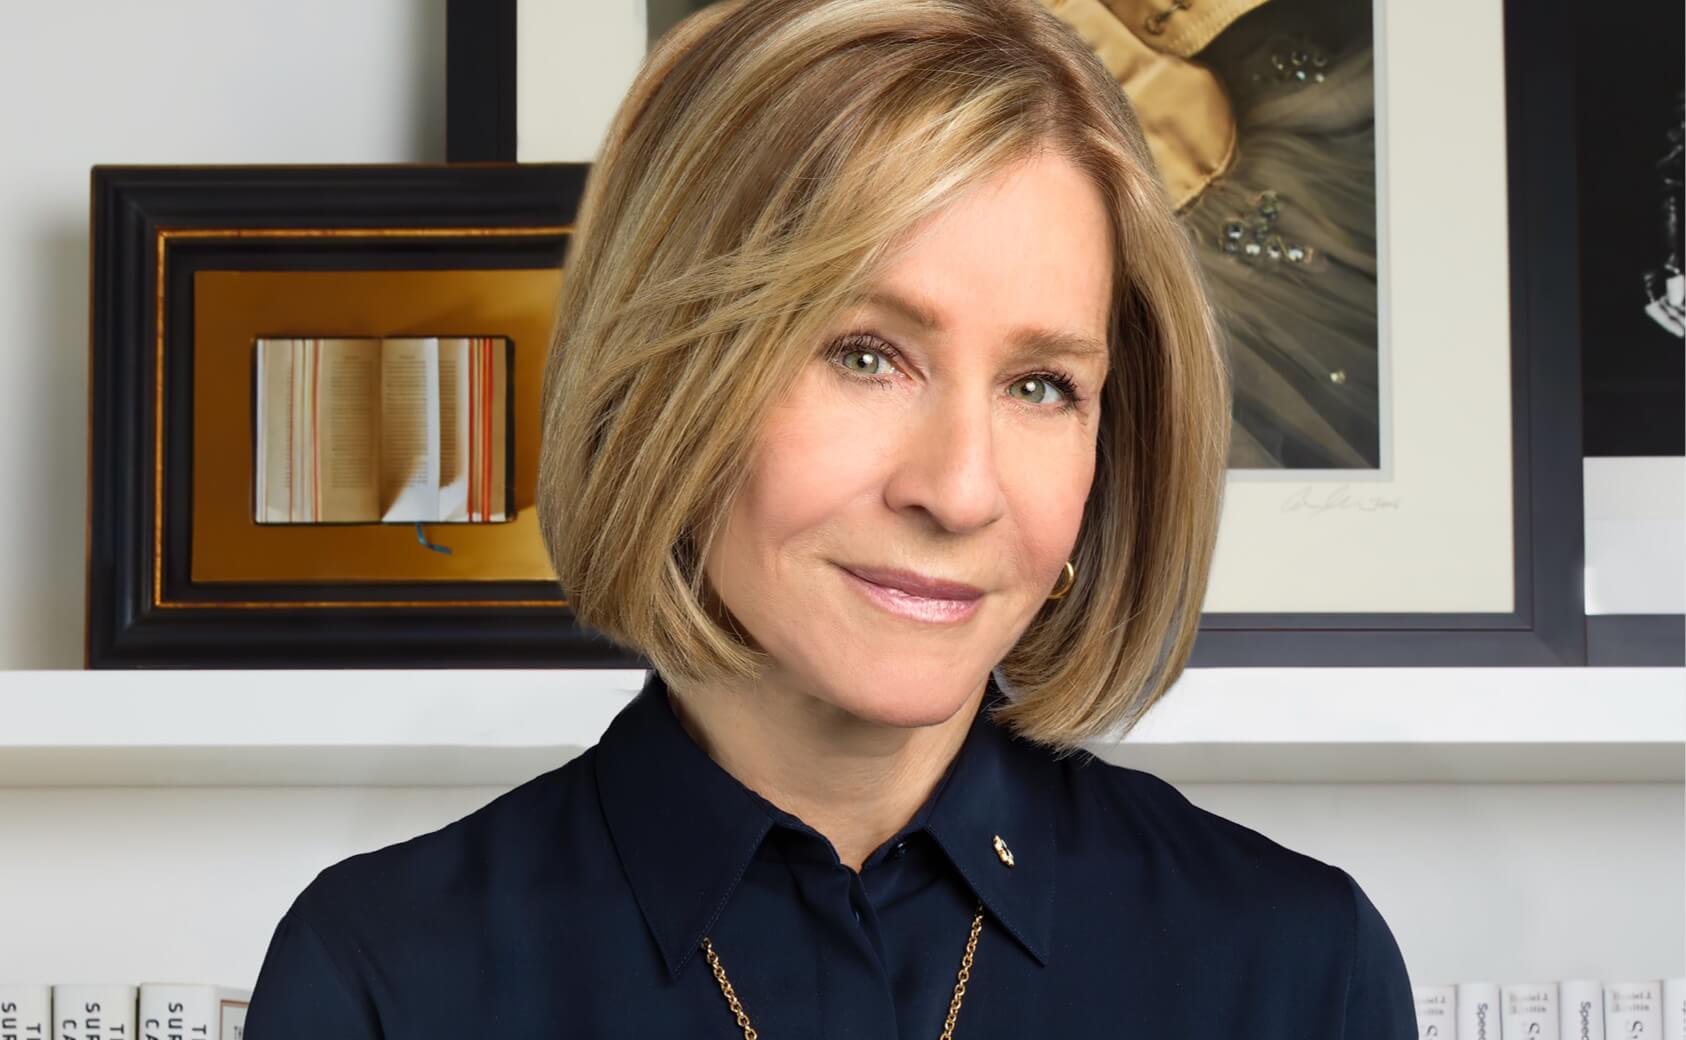 Indigo’s CEO and Chief Booklover, Heather Reisman, shares the best Heather’s Picks of all time.